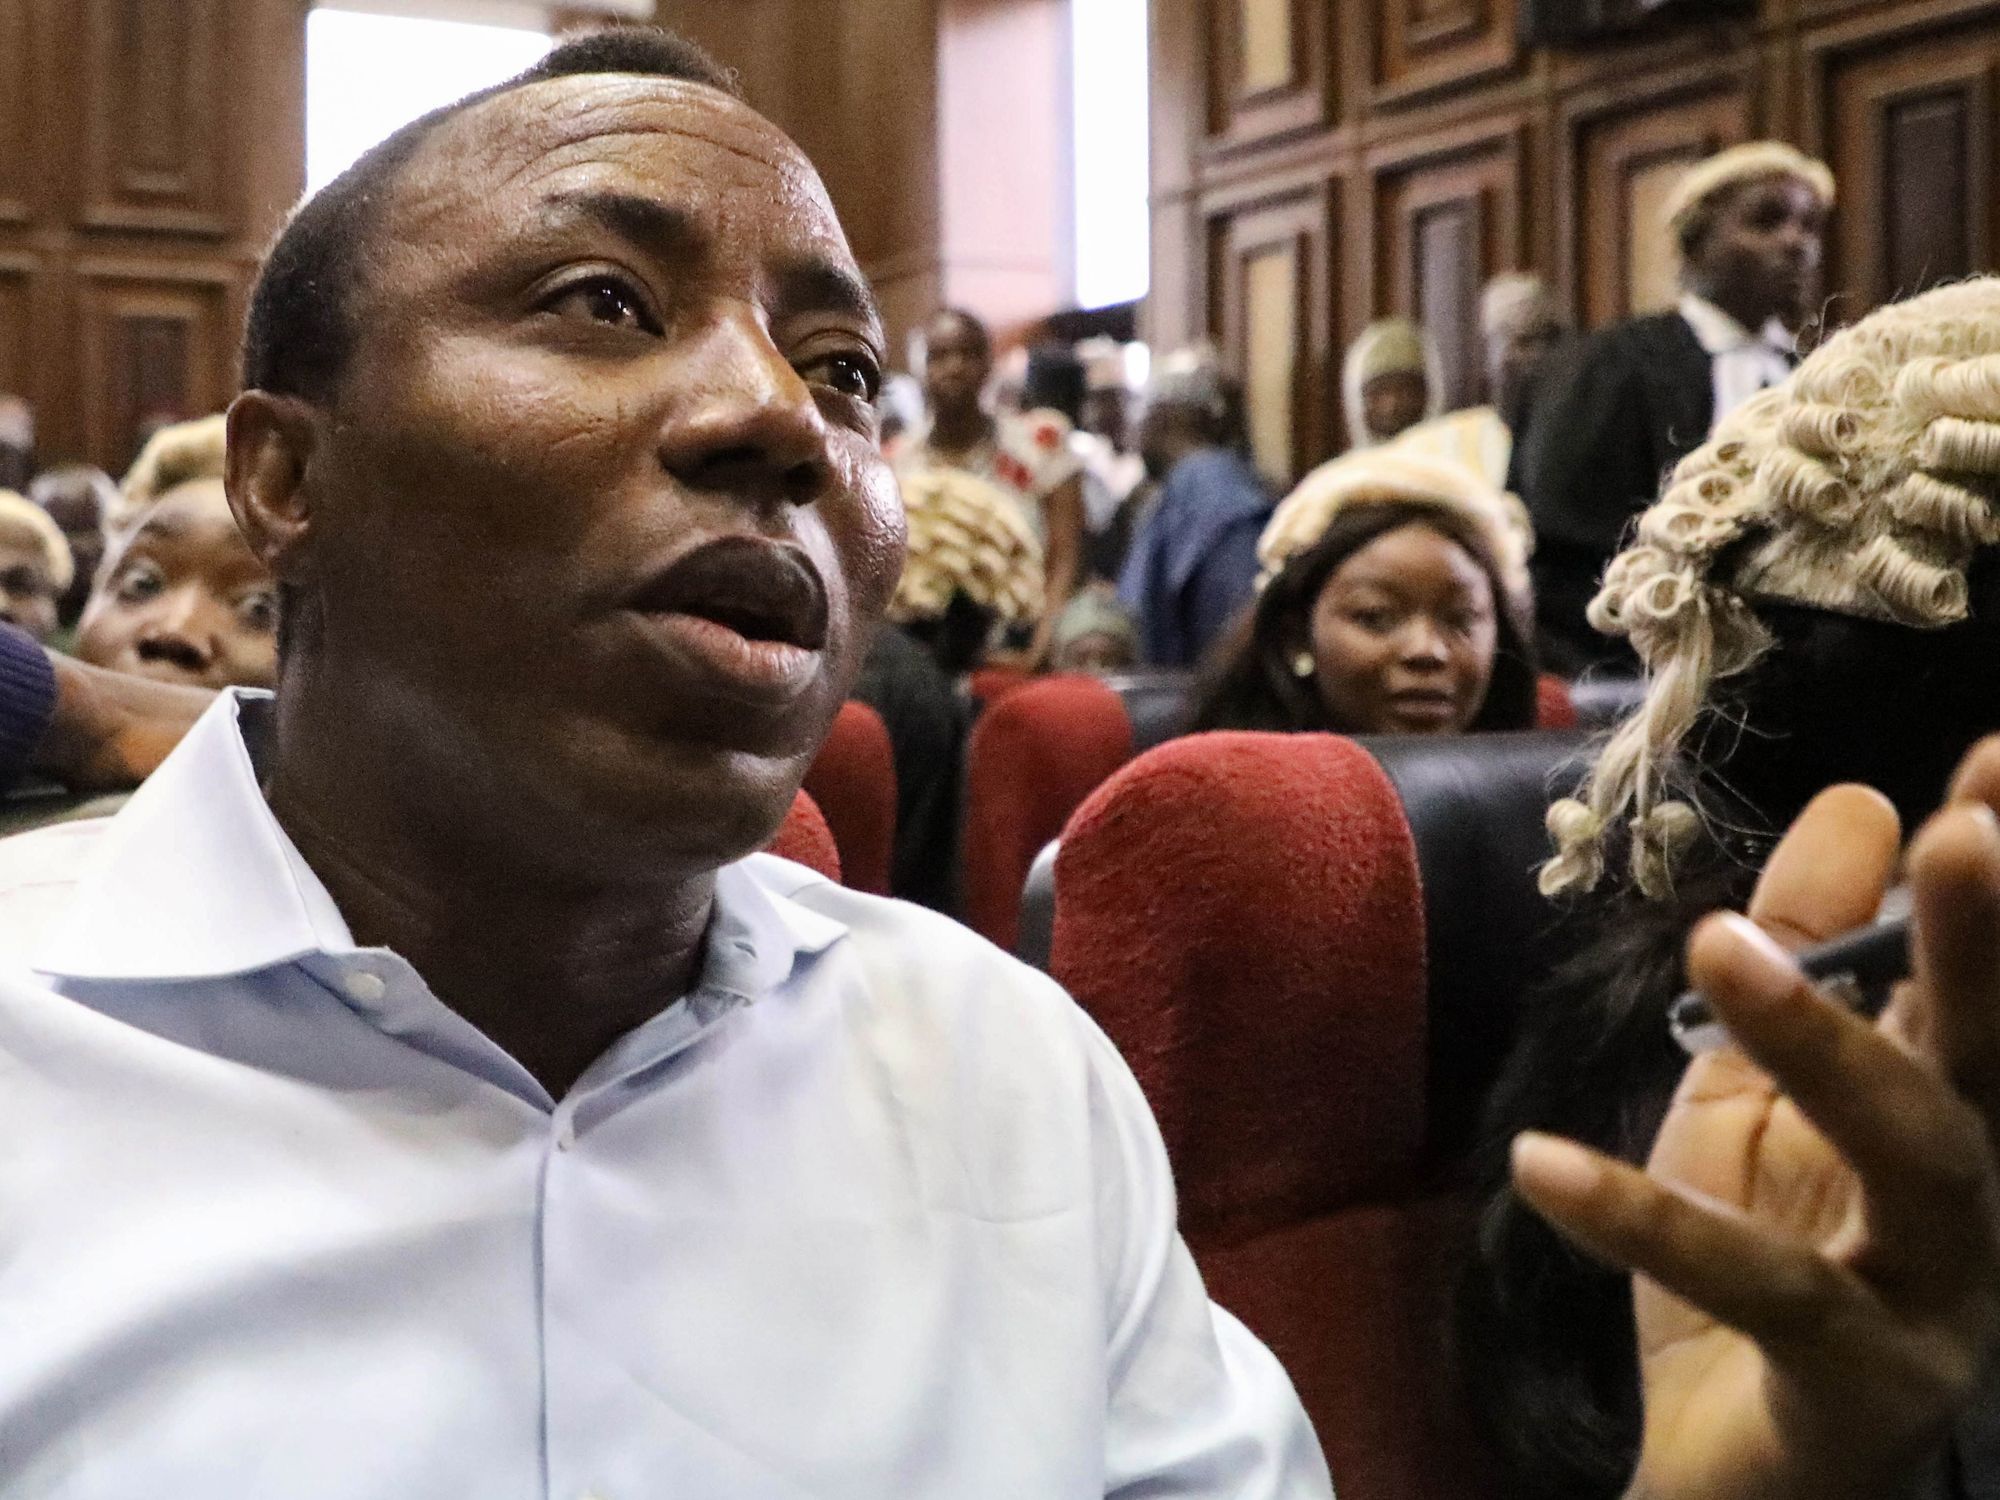 Nigerian Activist, Omoyele Sowore, Re-Arrested Just Hours After Being Released on Bail